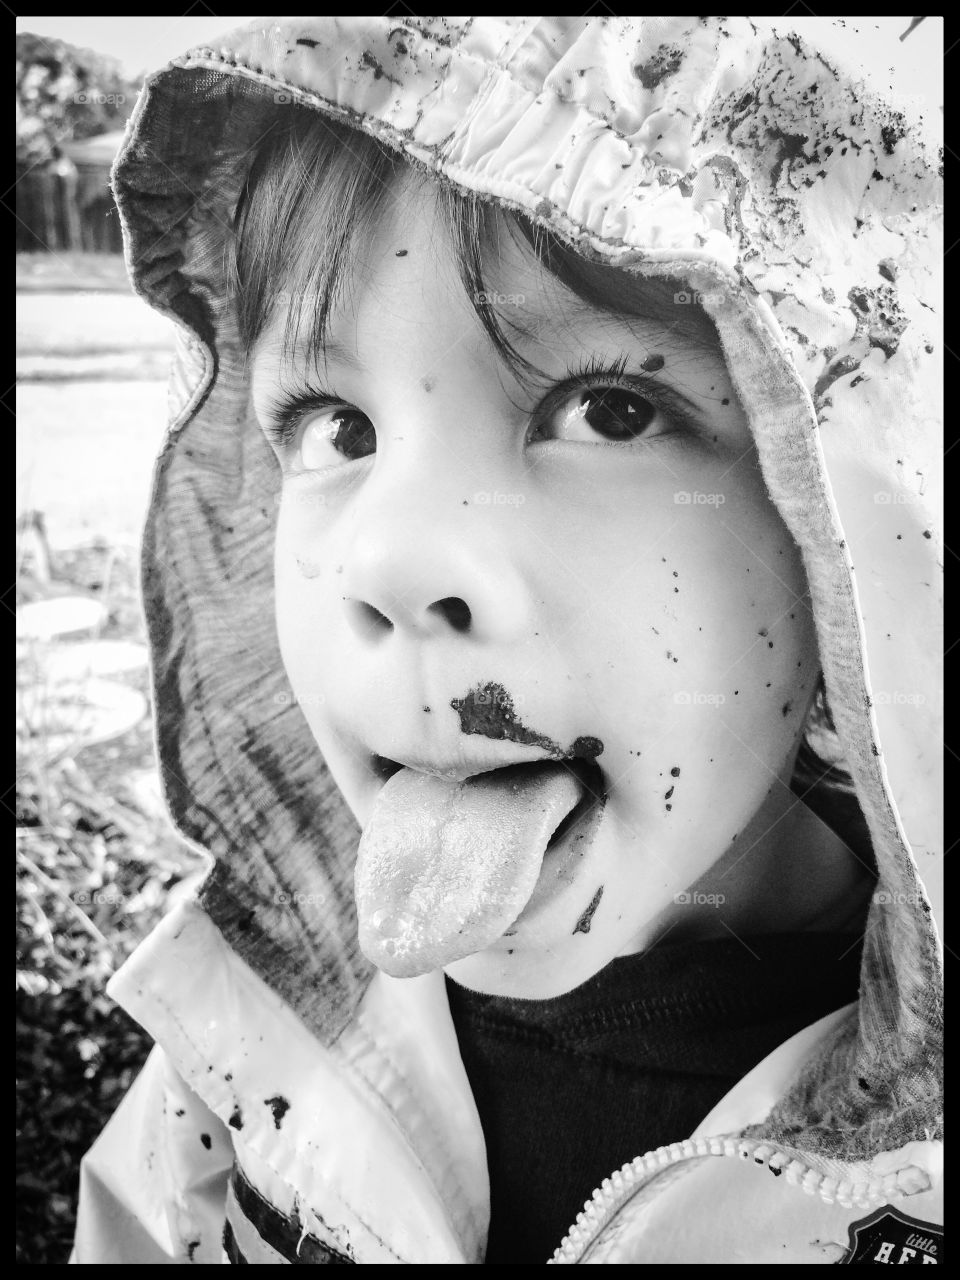 Muddy face. Boy with mud splattered on his face